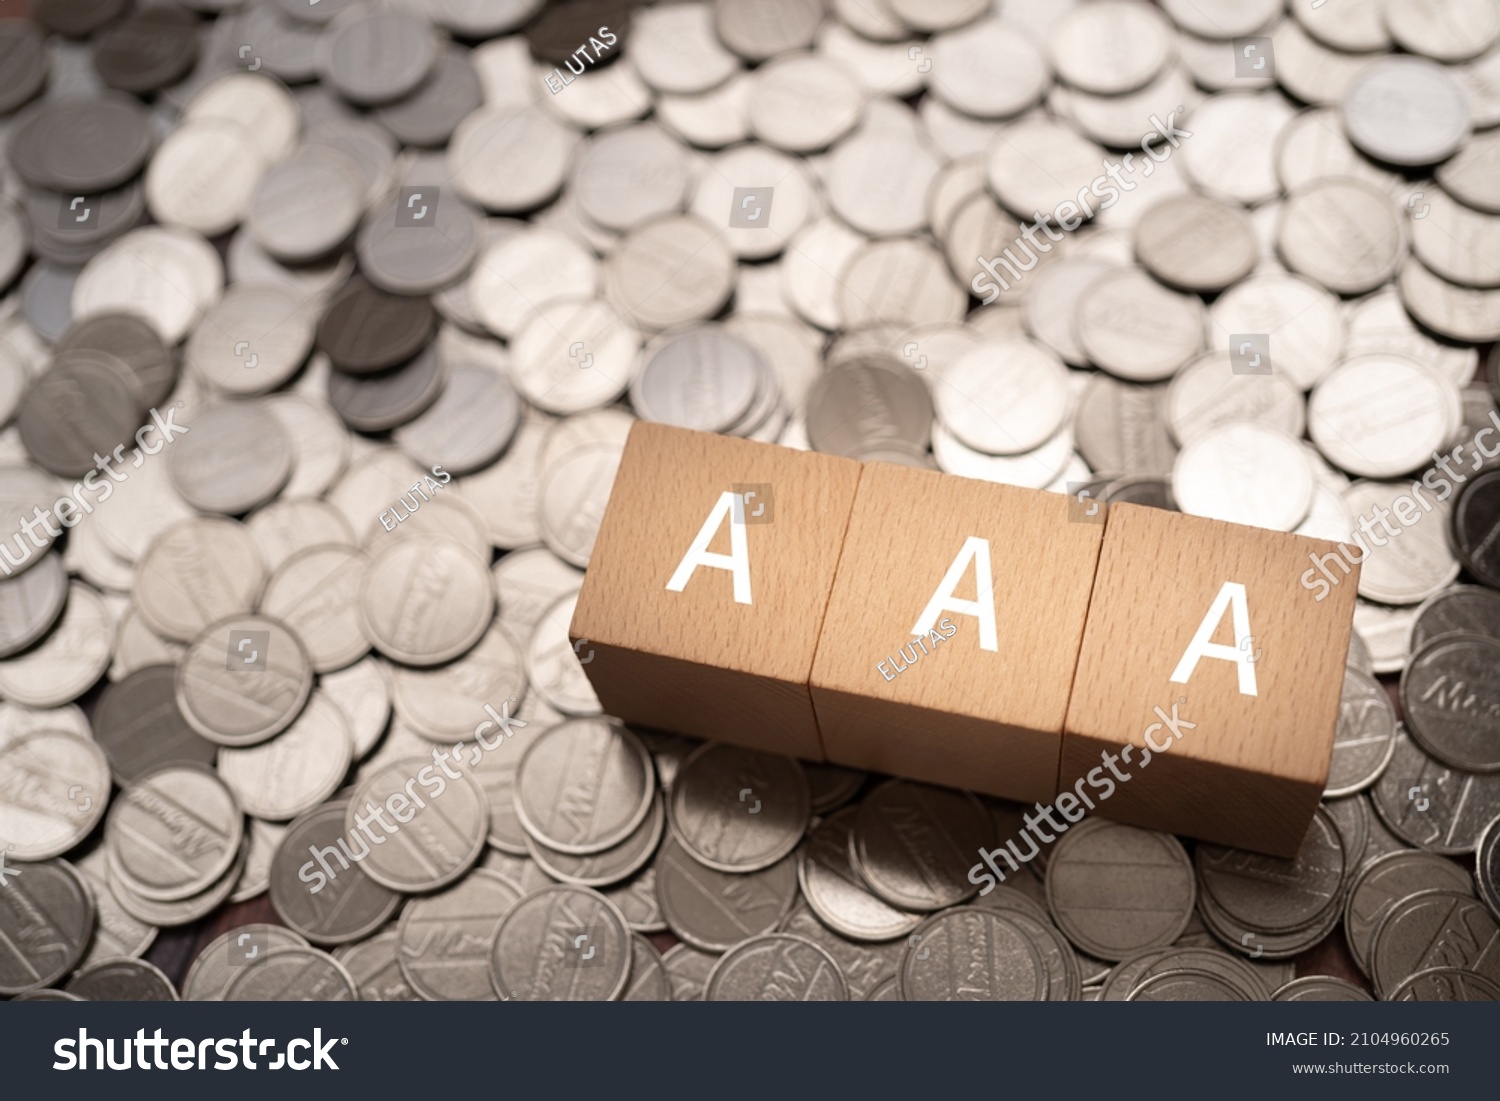 Wooden blocks with "AAA" text of concept and coins. #2104960265